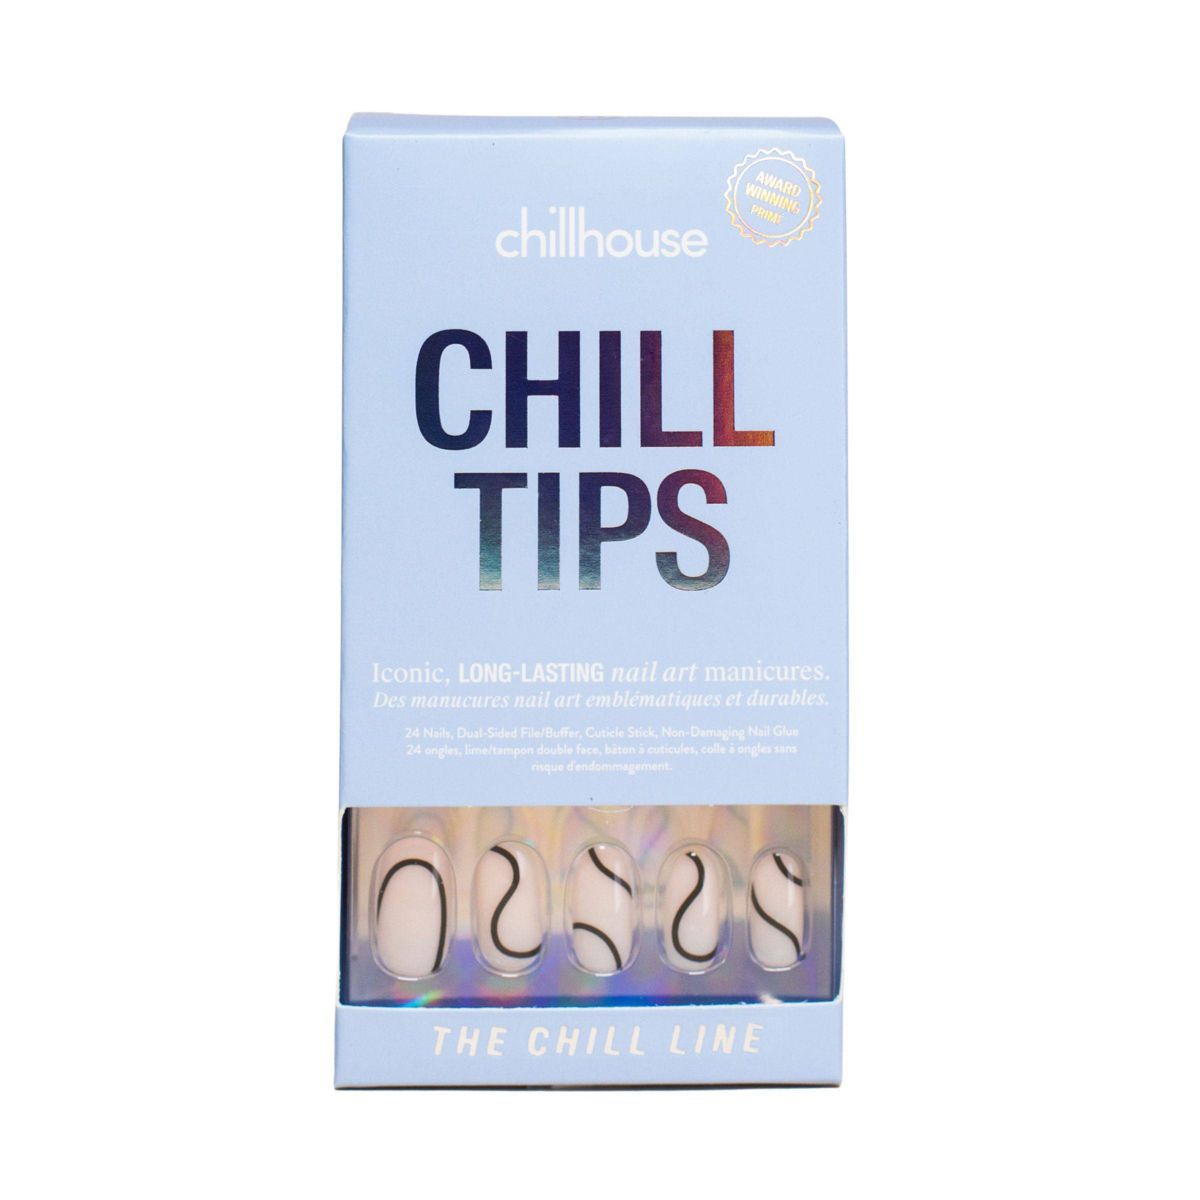 Chillhouse Chill Tips Nail Art Press On Fake Nails - The Chill Line - 24ct | Target